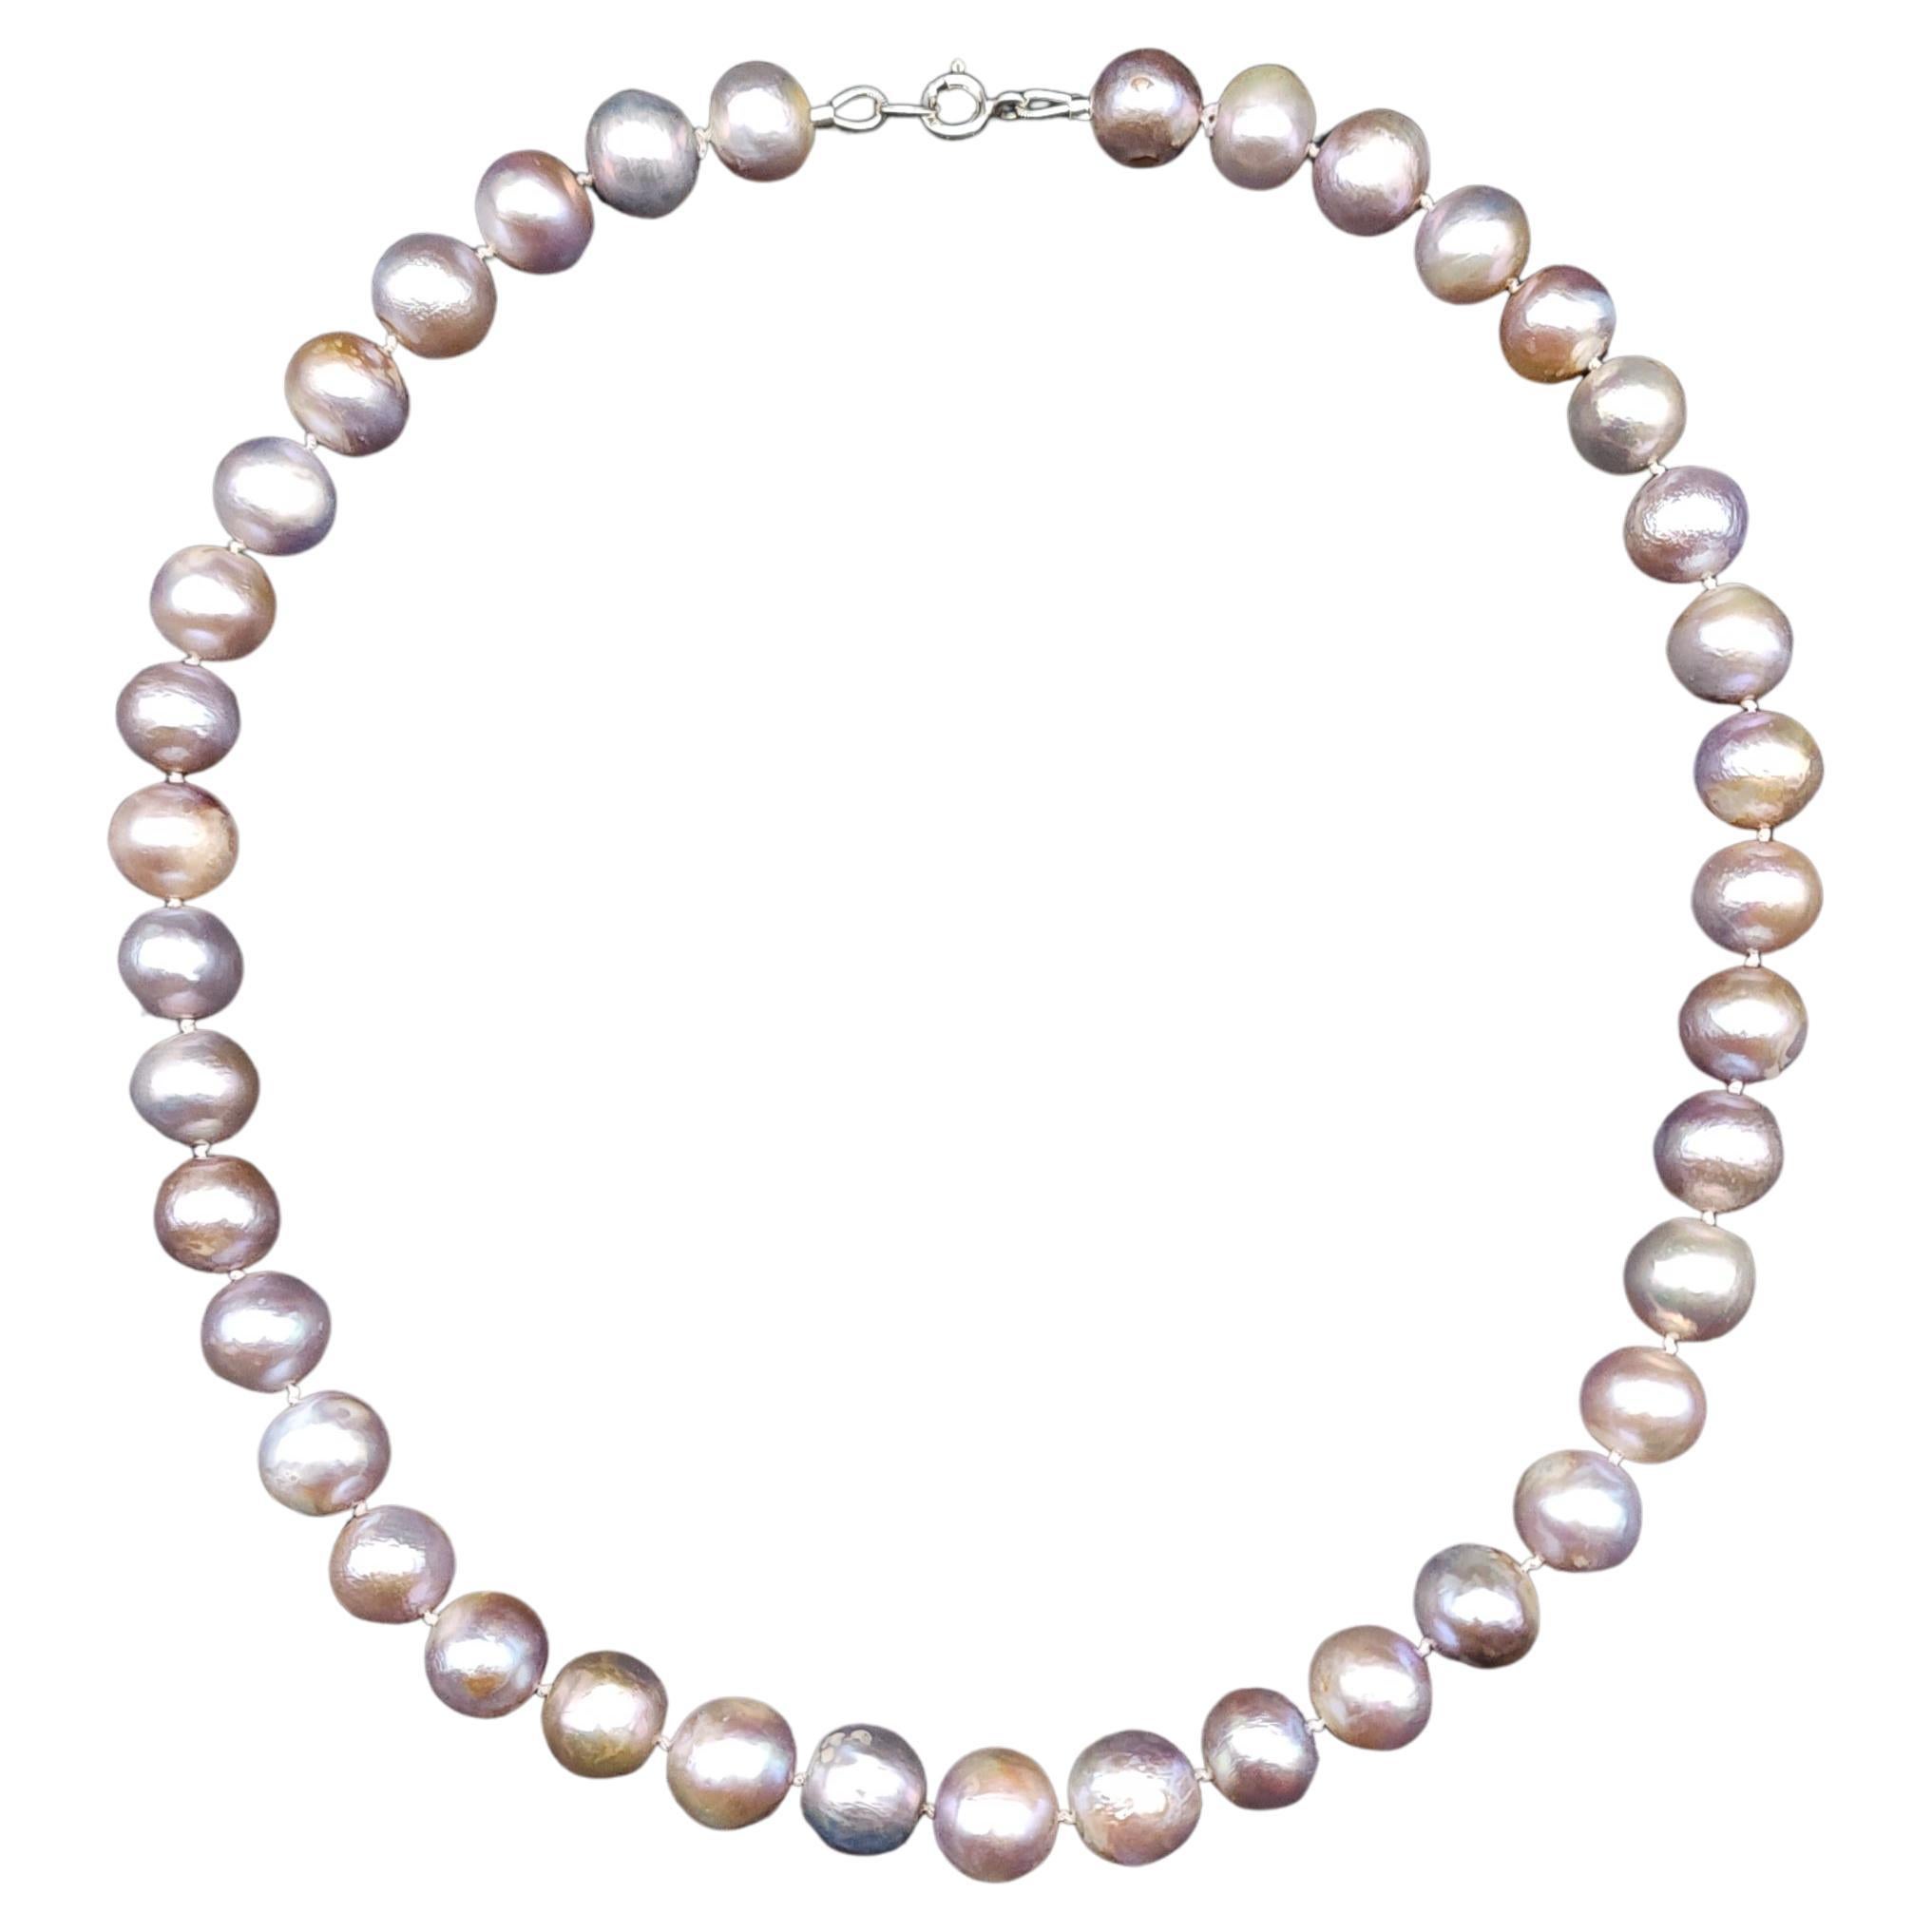 Vintage Lavender Pearl Collar Necklace with Sterling Silver Accents, Clasp For Sale